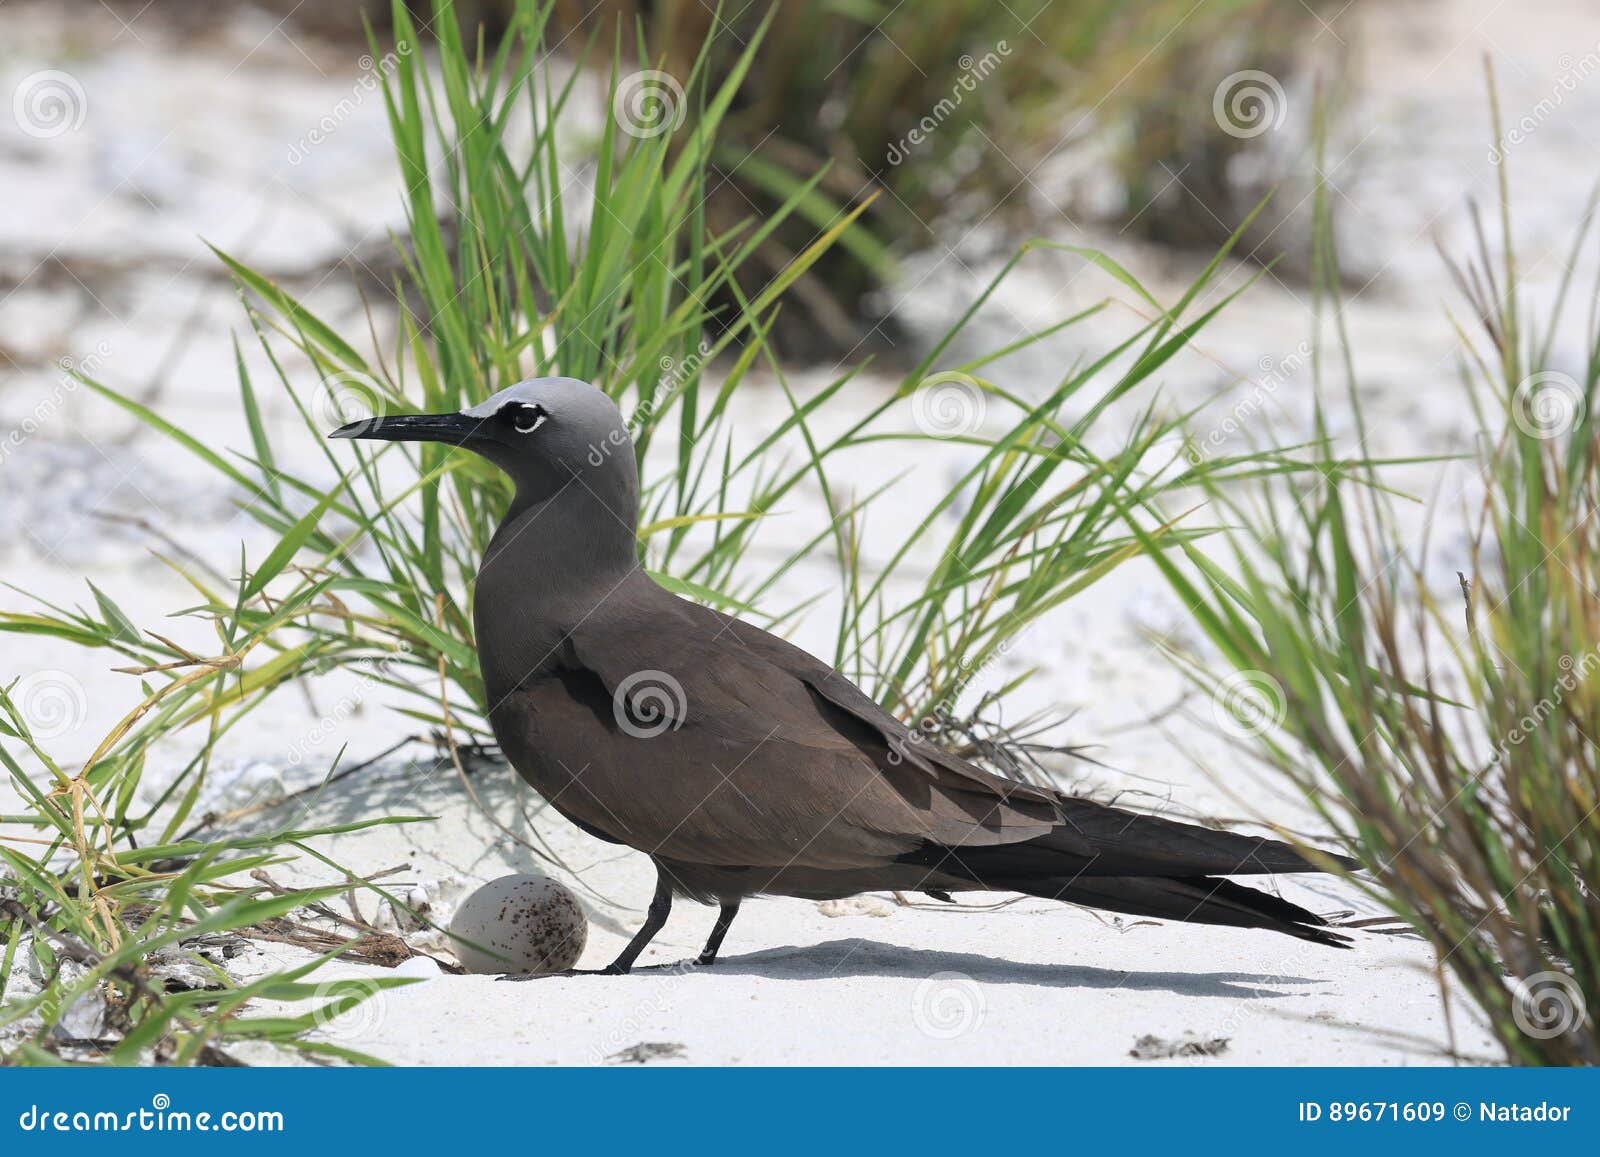 brown noddy brooding an egg